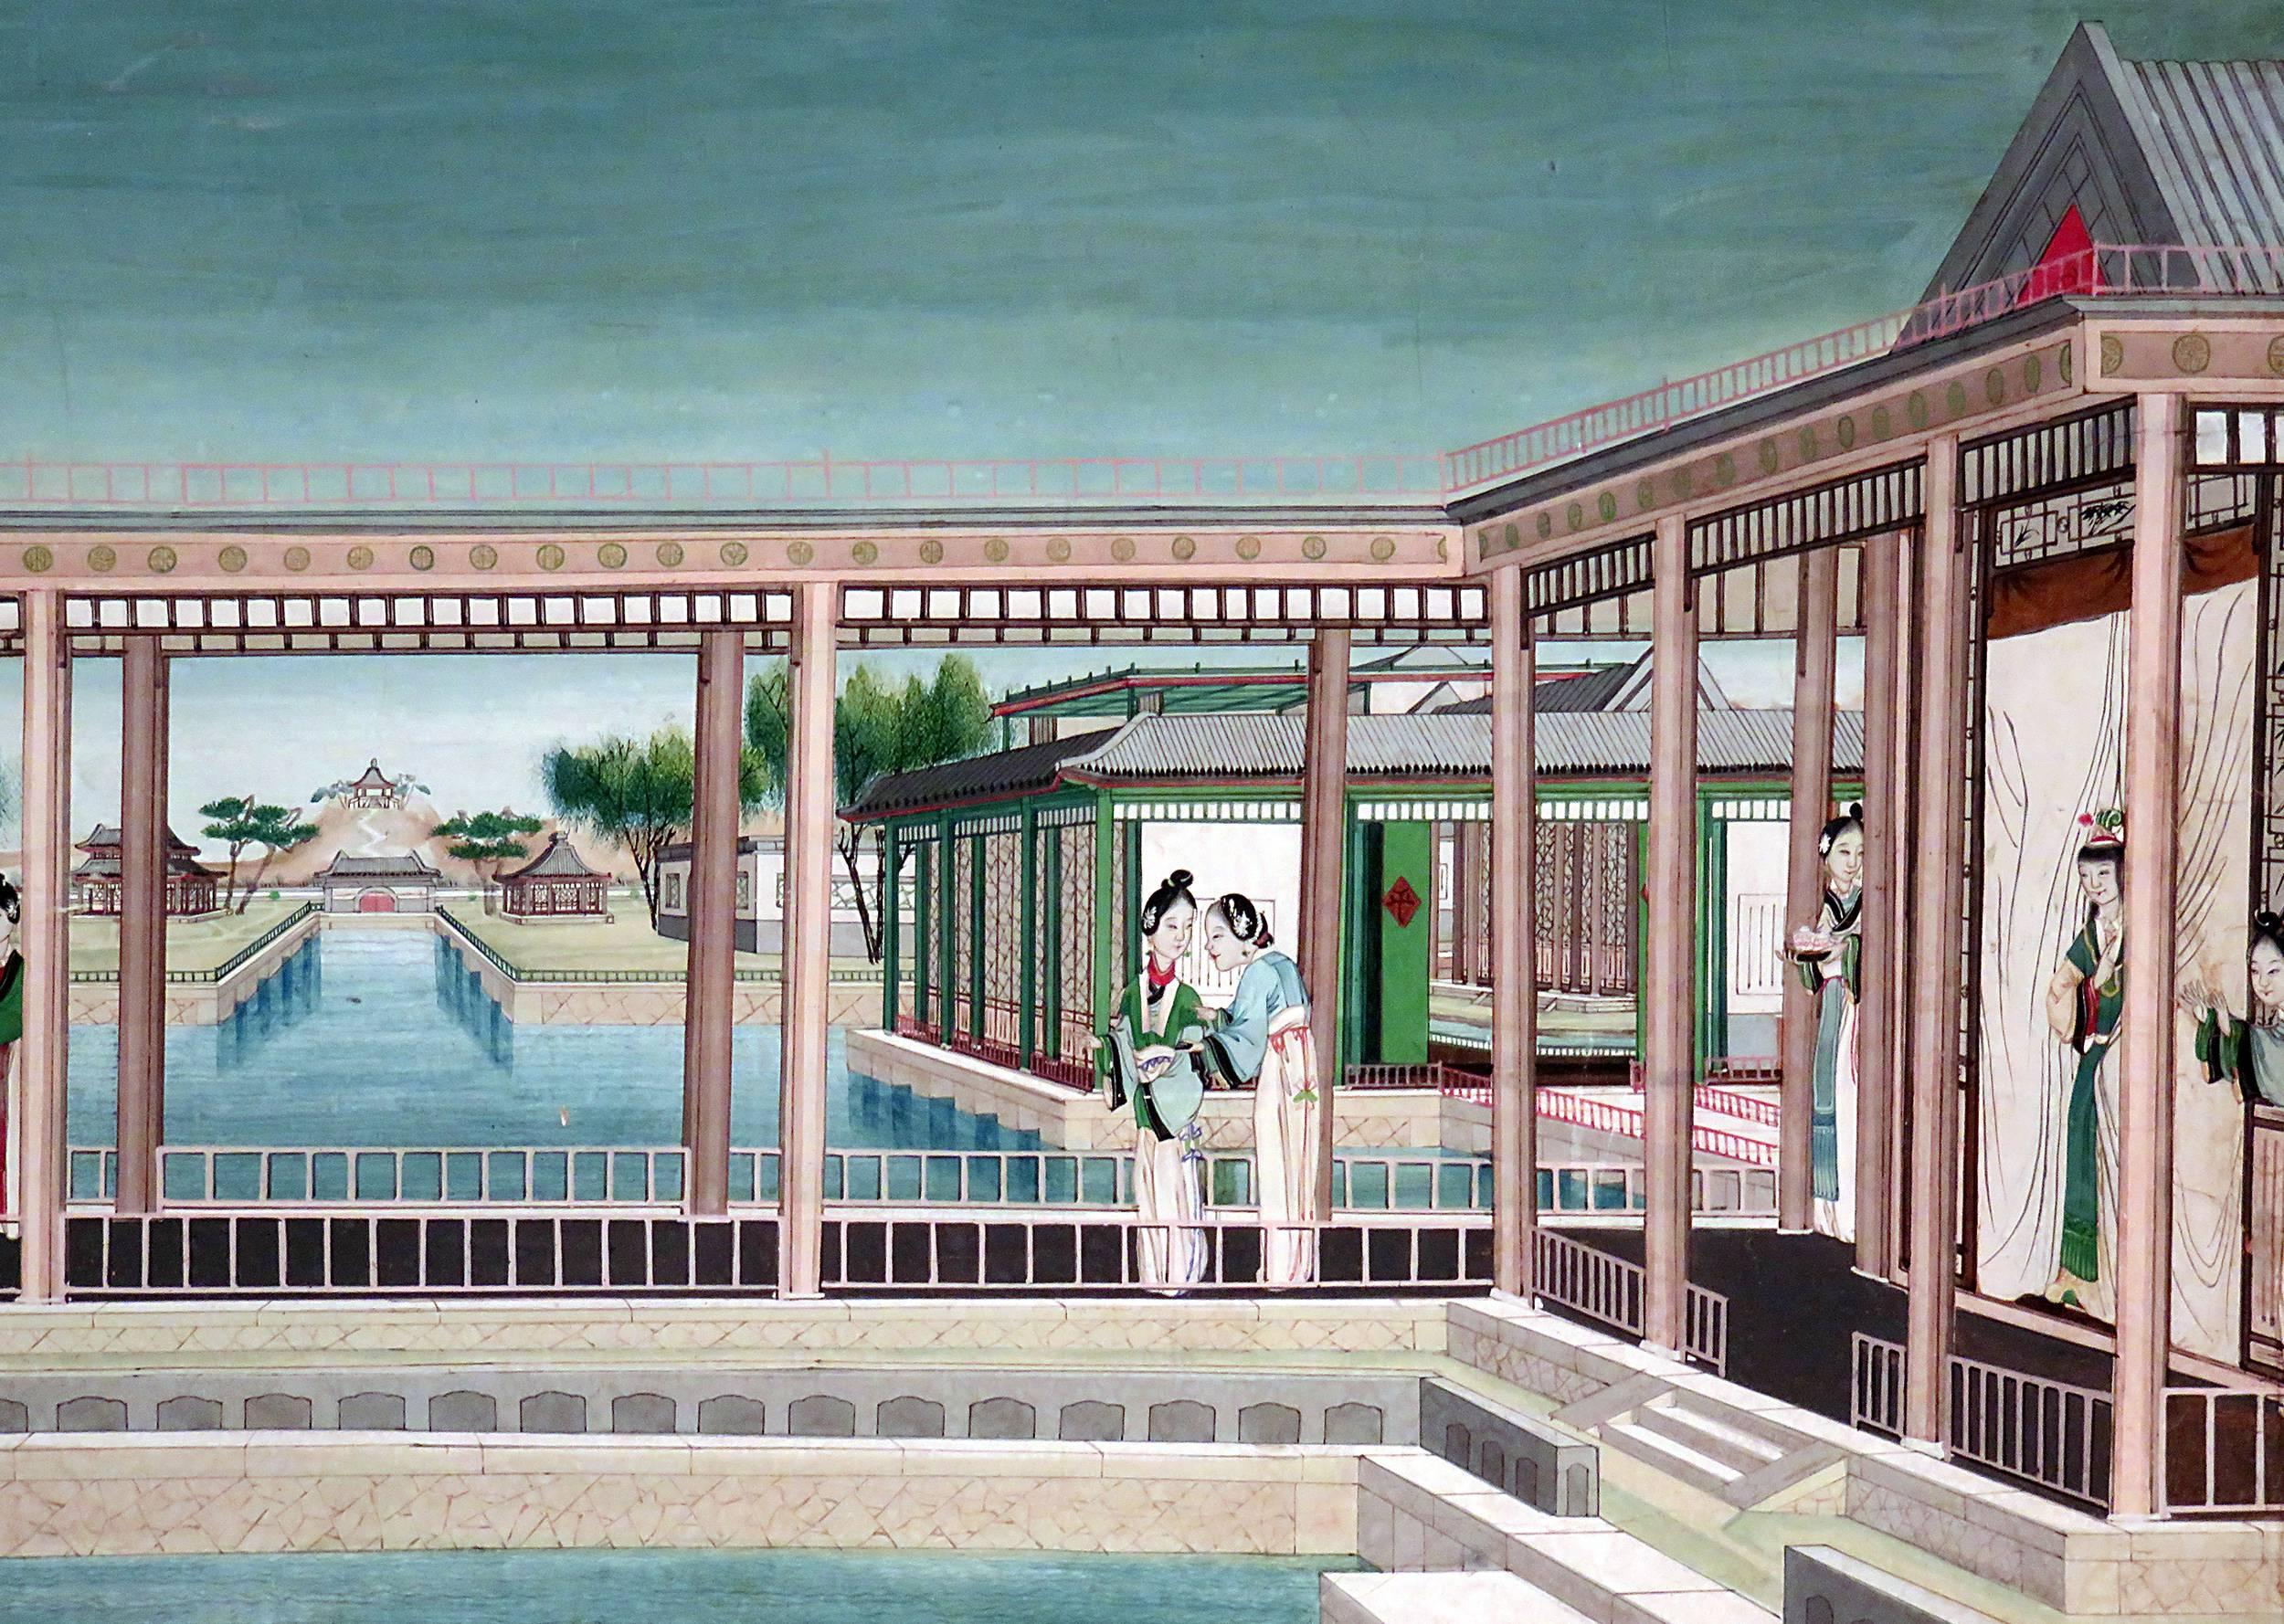 A very nicely painted scene depicting a group of beauties and a male in a palace setting on the water. Pleasing and decorative subject symmetrical beyond belief. We date this to the end of the Ching dynasty and imagine it is a piece made for export.